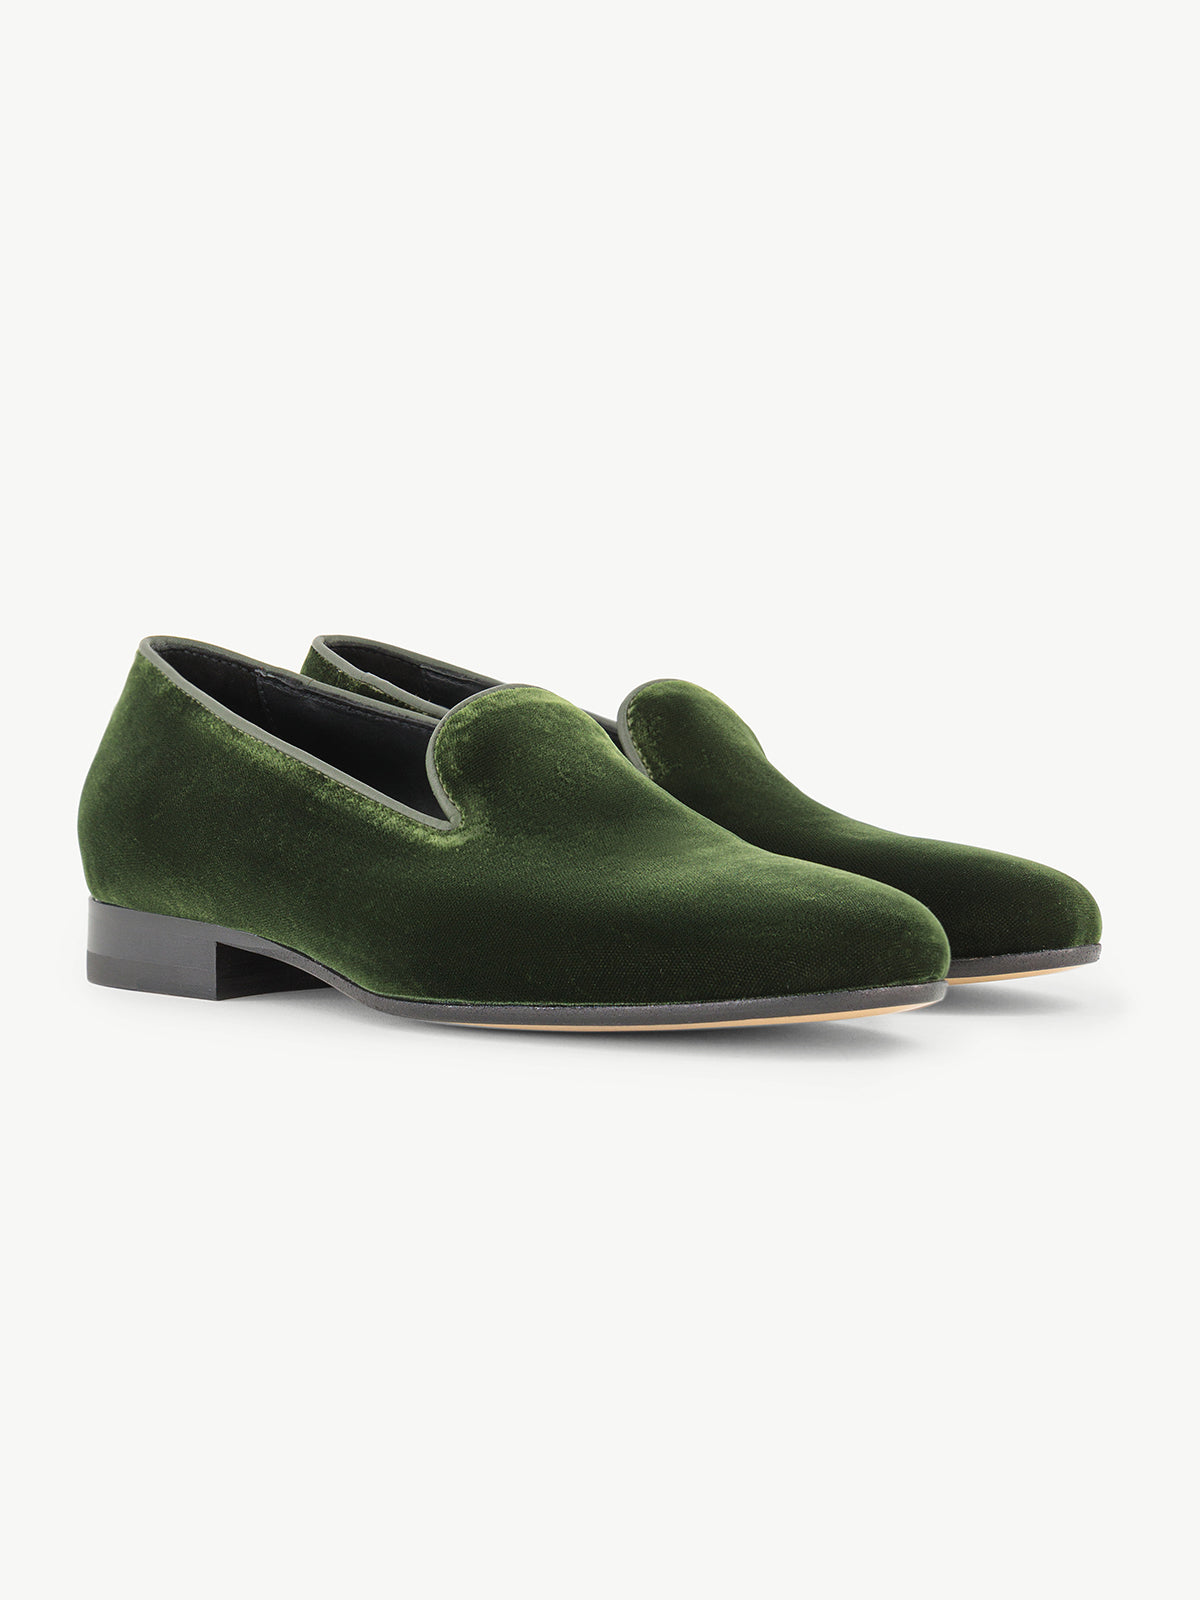 Forest Green Slippers